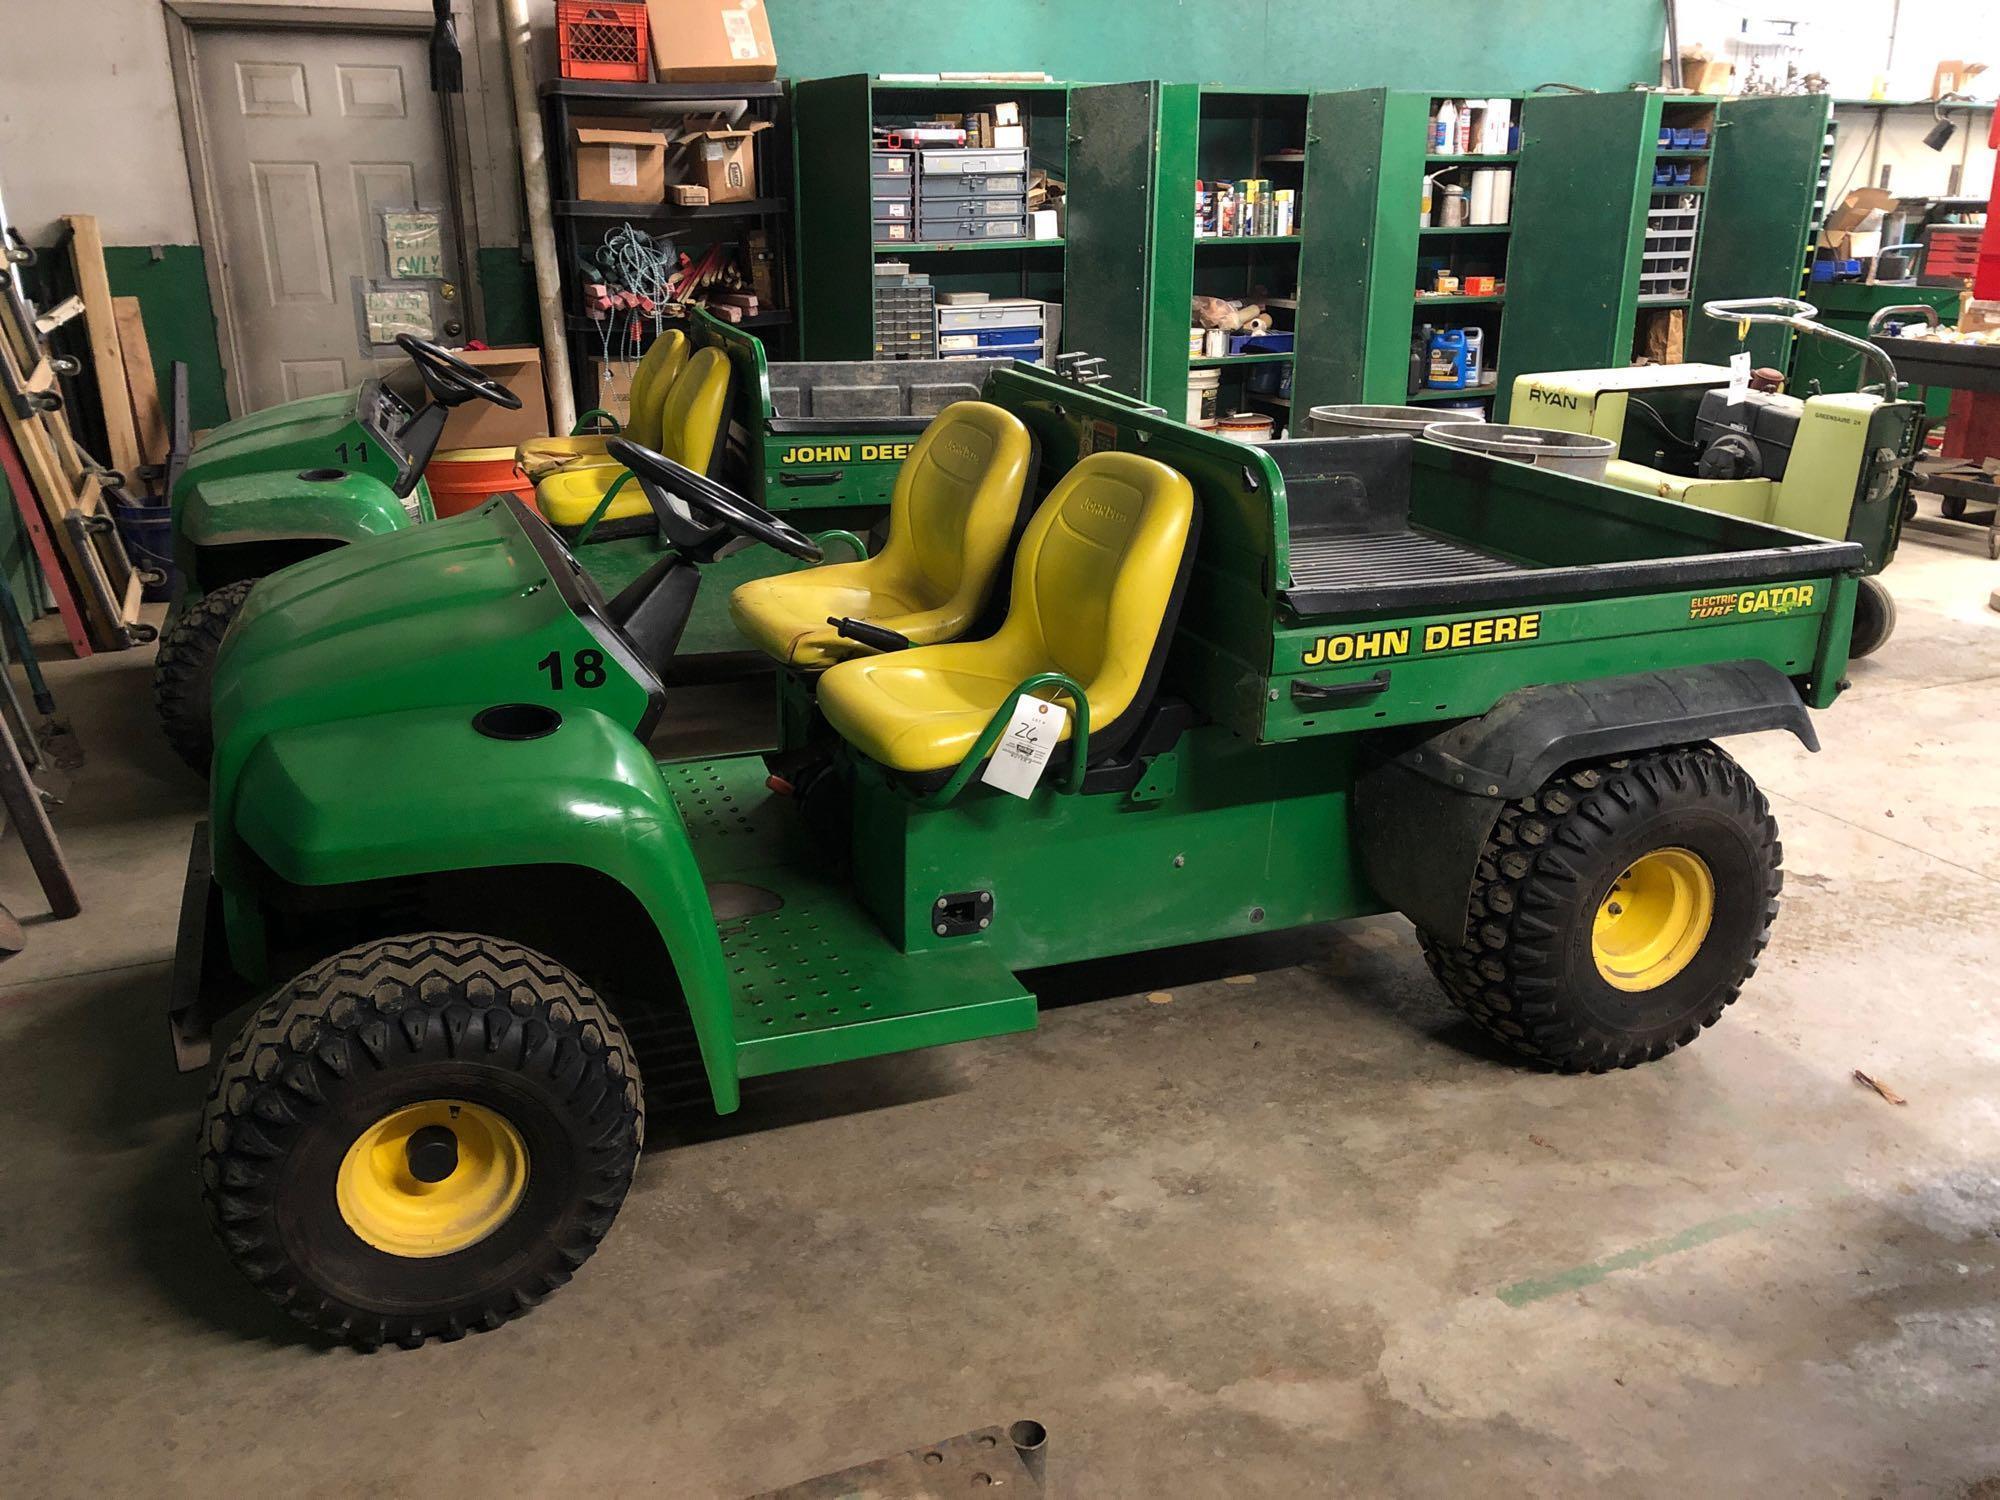 John Deere electric turf gator w/ charger, 2,058 hrs., 43 x 48 electric dump bed